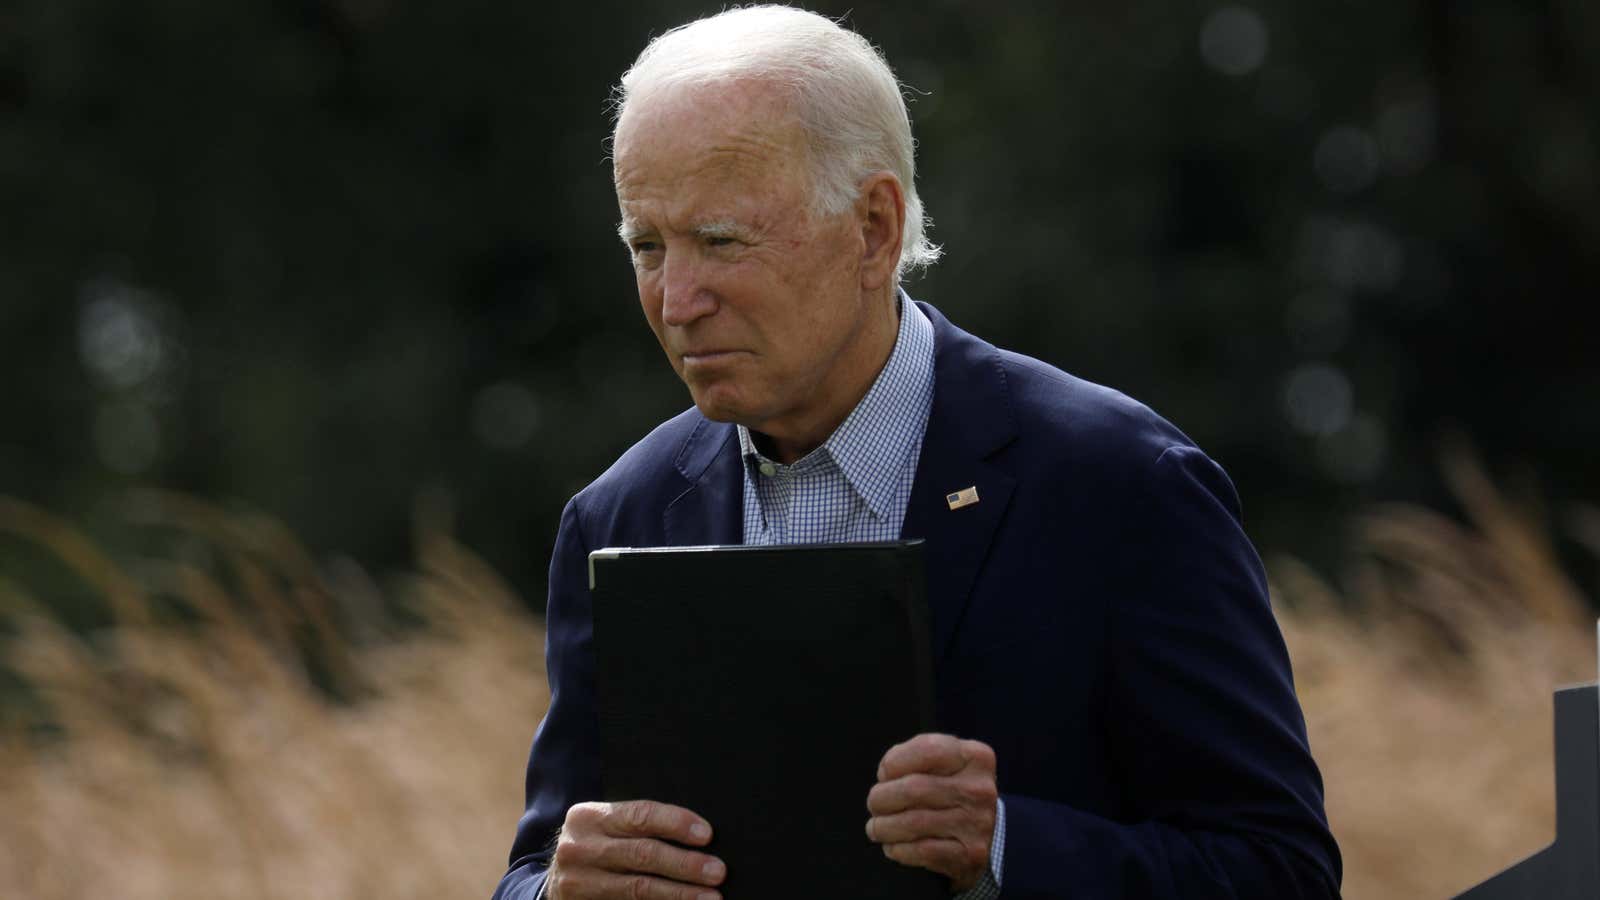 Joe Biden’s first round of climate actions will be geared toward setting a new emissions target under the Paris Agreement.